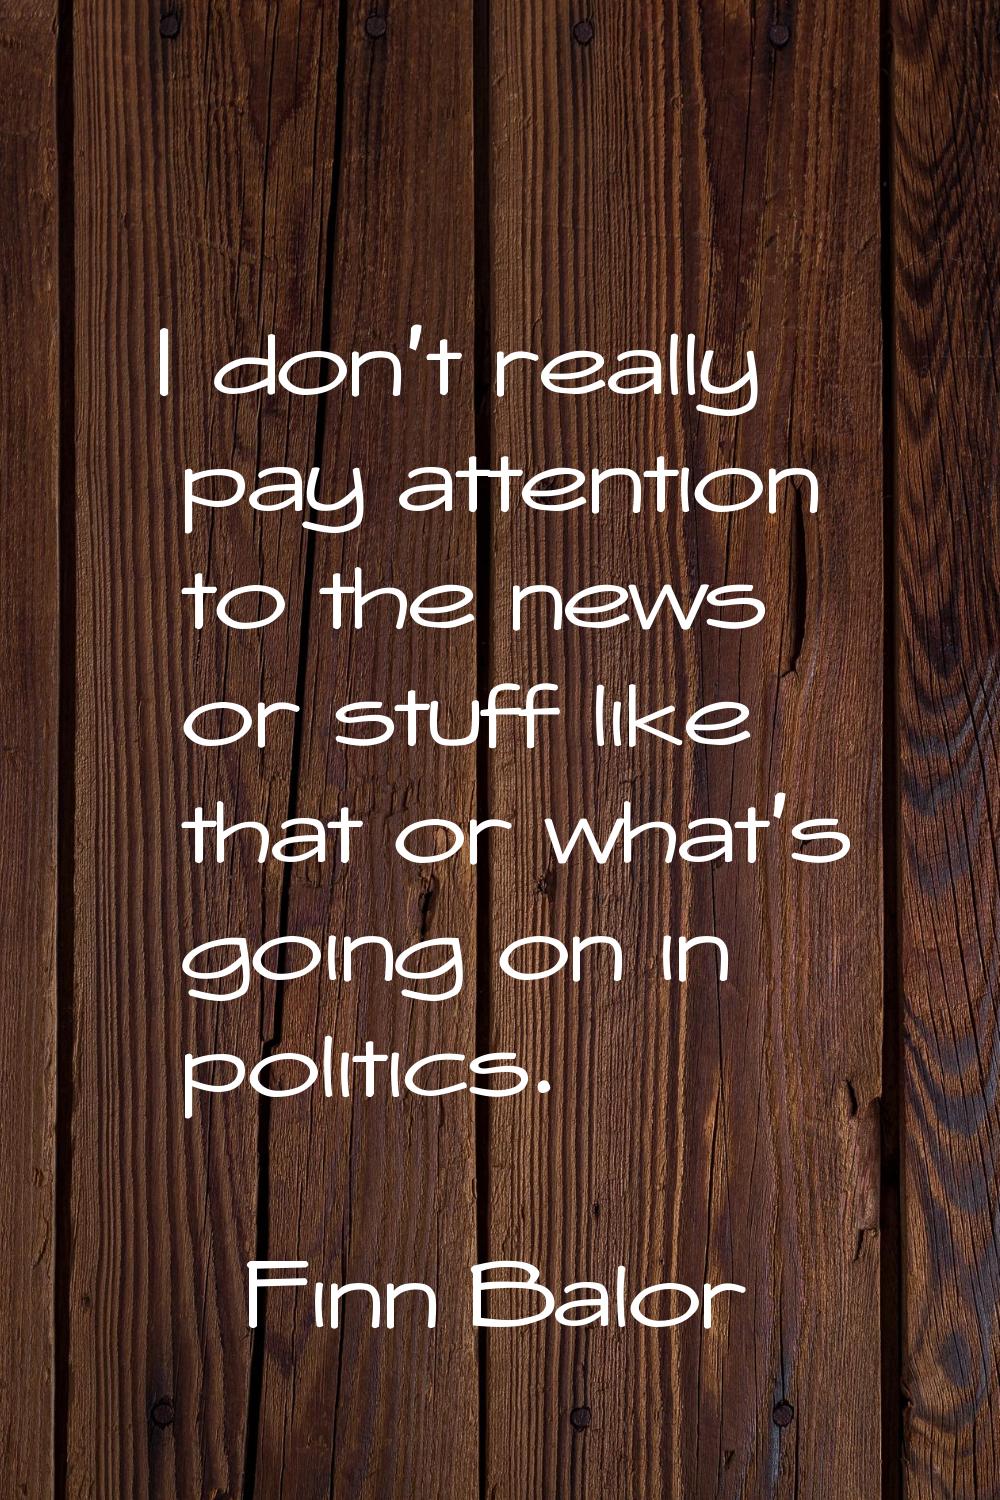 I don't really pay attention to the news or stuff like that or what's going on in politics.